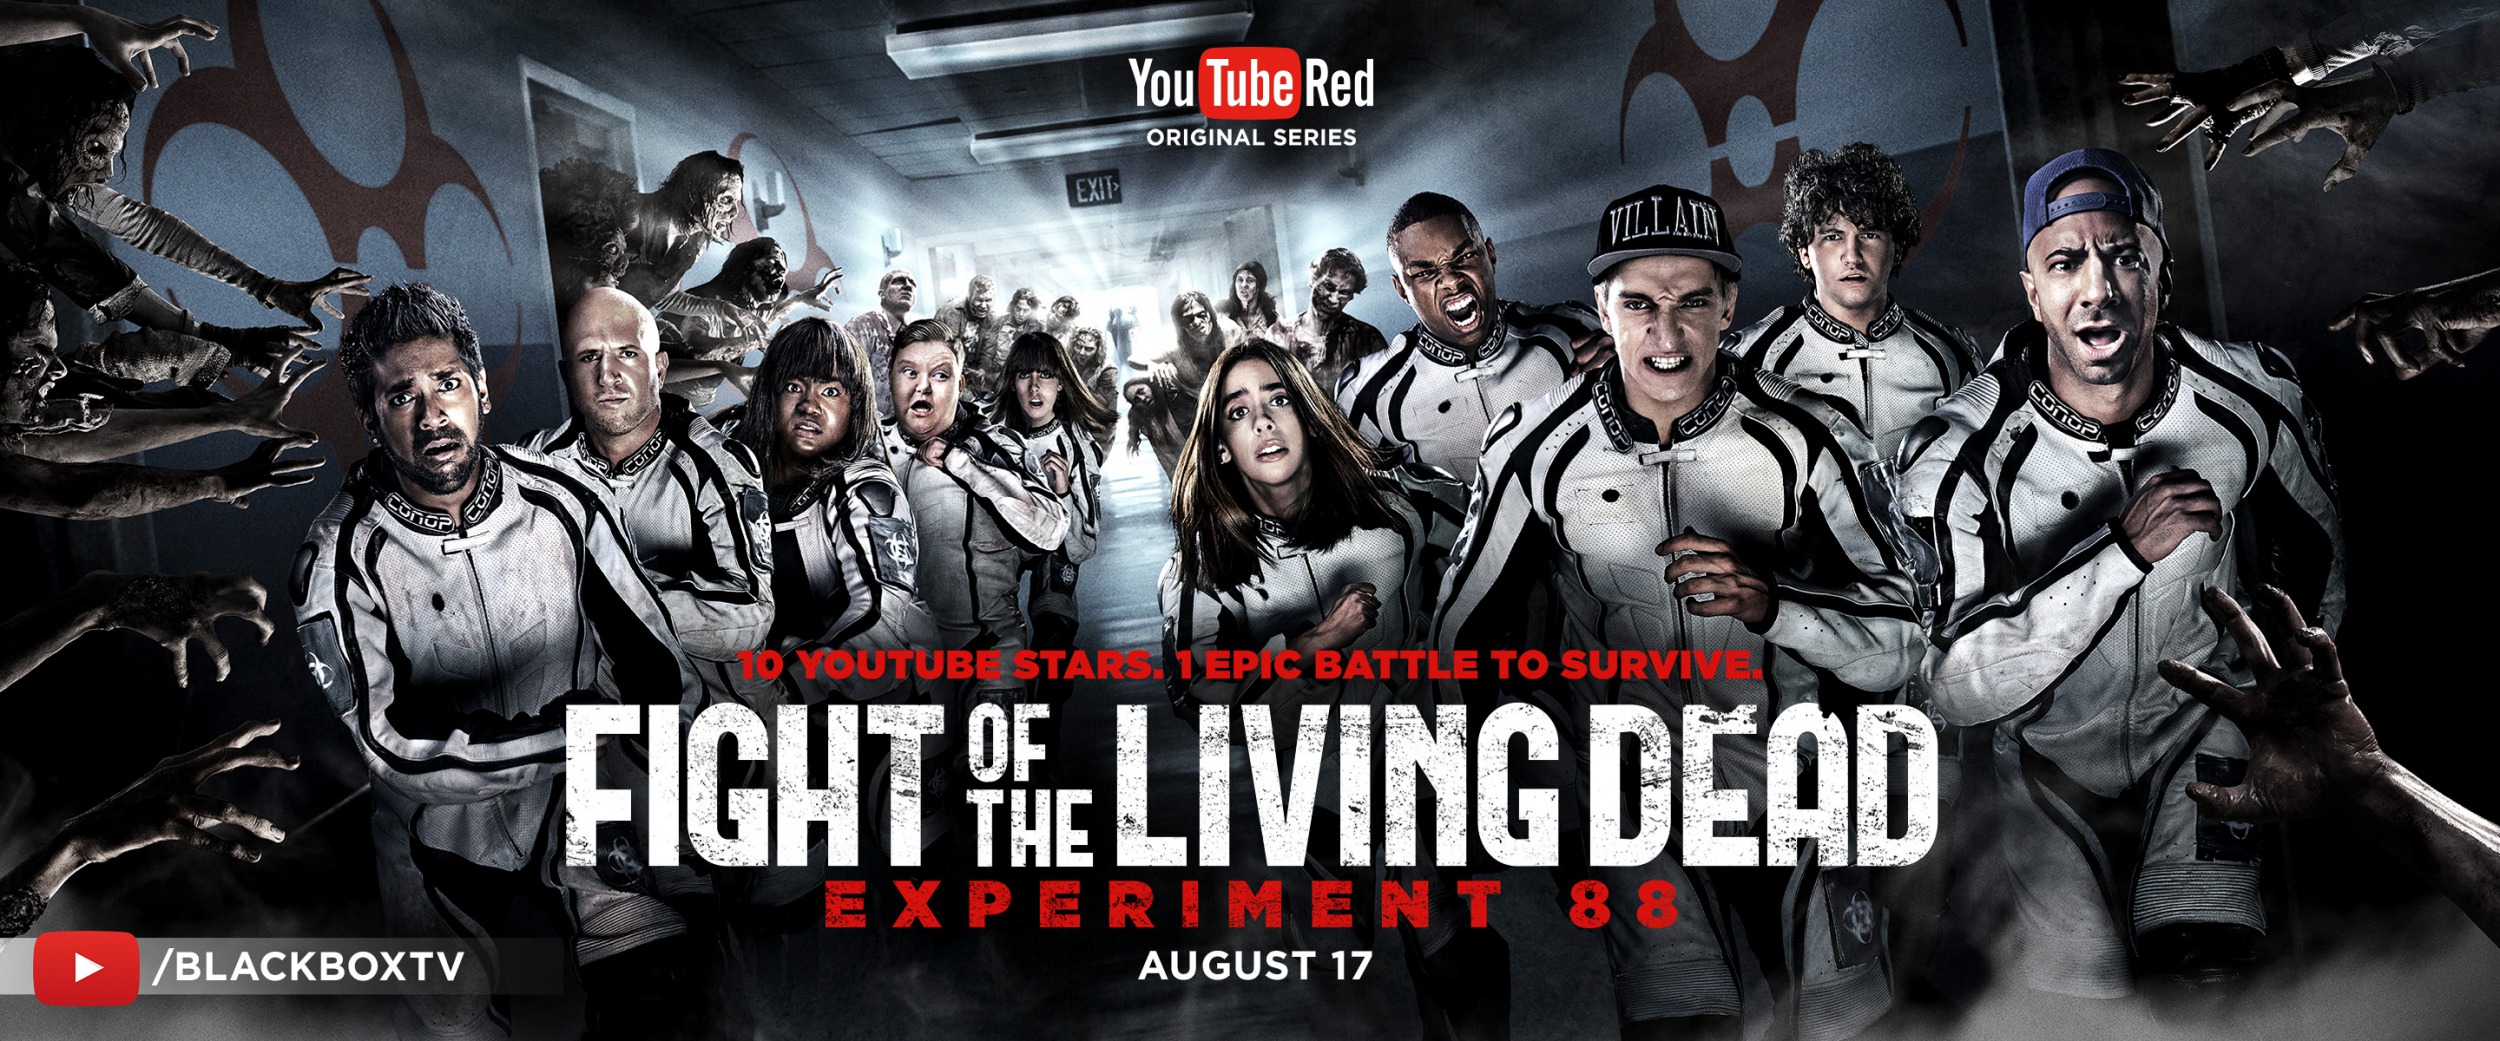 Mega Sized TV Poster Image for Fight of the Living Dead (#2 of 51)